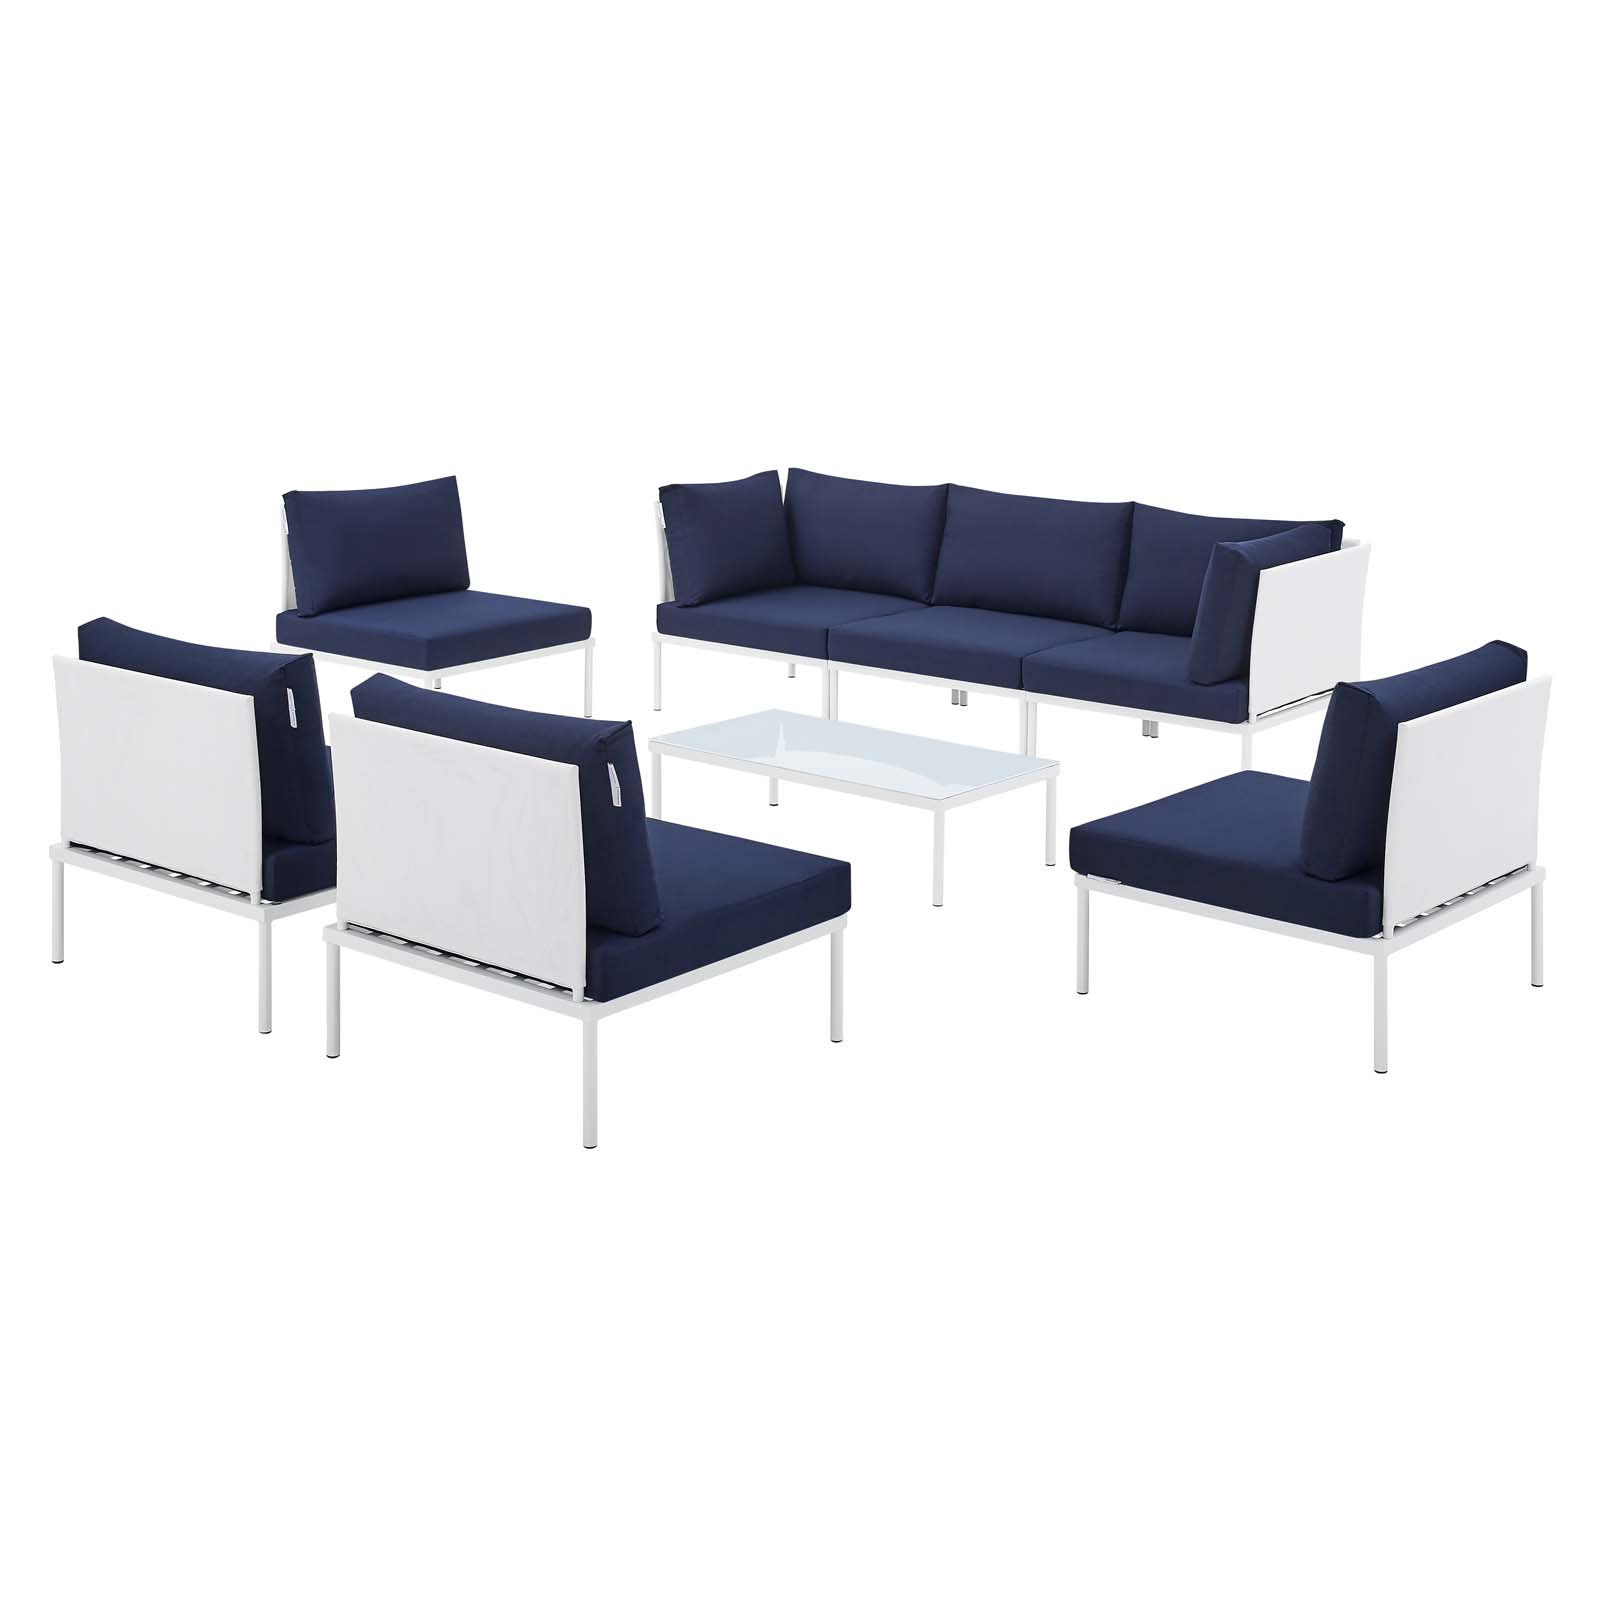 Lounge Sectional Sofa Chair Table Set, Sunbrella, Aluminum, Metal, Steel, White Blue Navy, Modern Contemporary Urban Design, Outdoor Patio Balcony Cafe Bistro Garden Furniture Hotel Hospitality - image 1 of 10